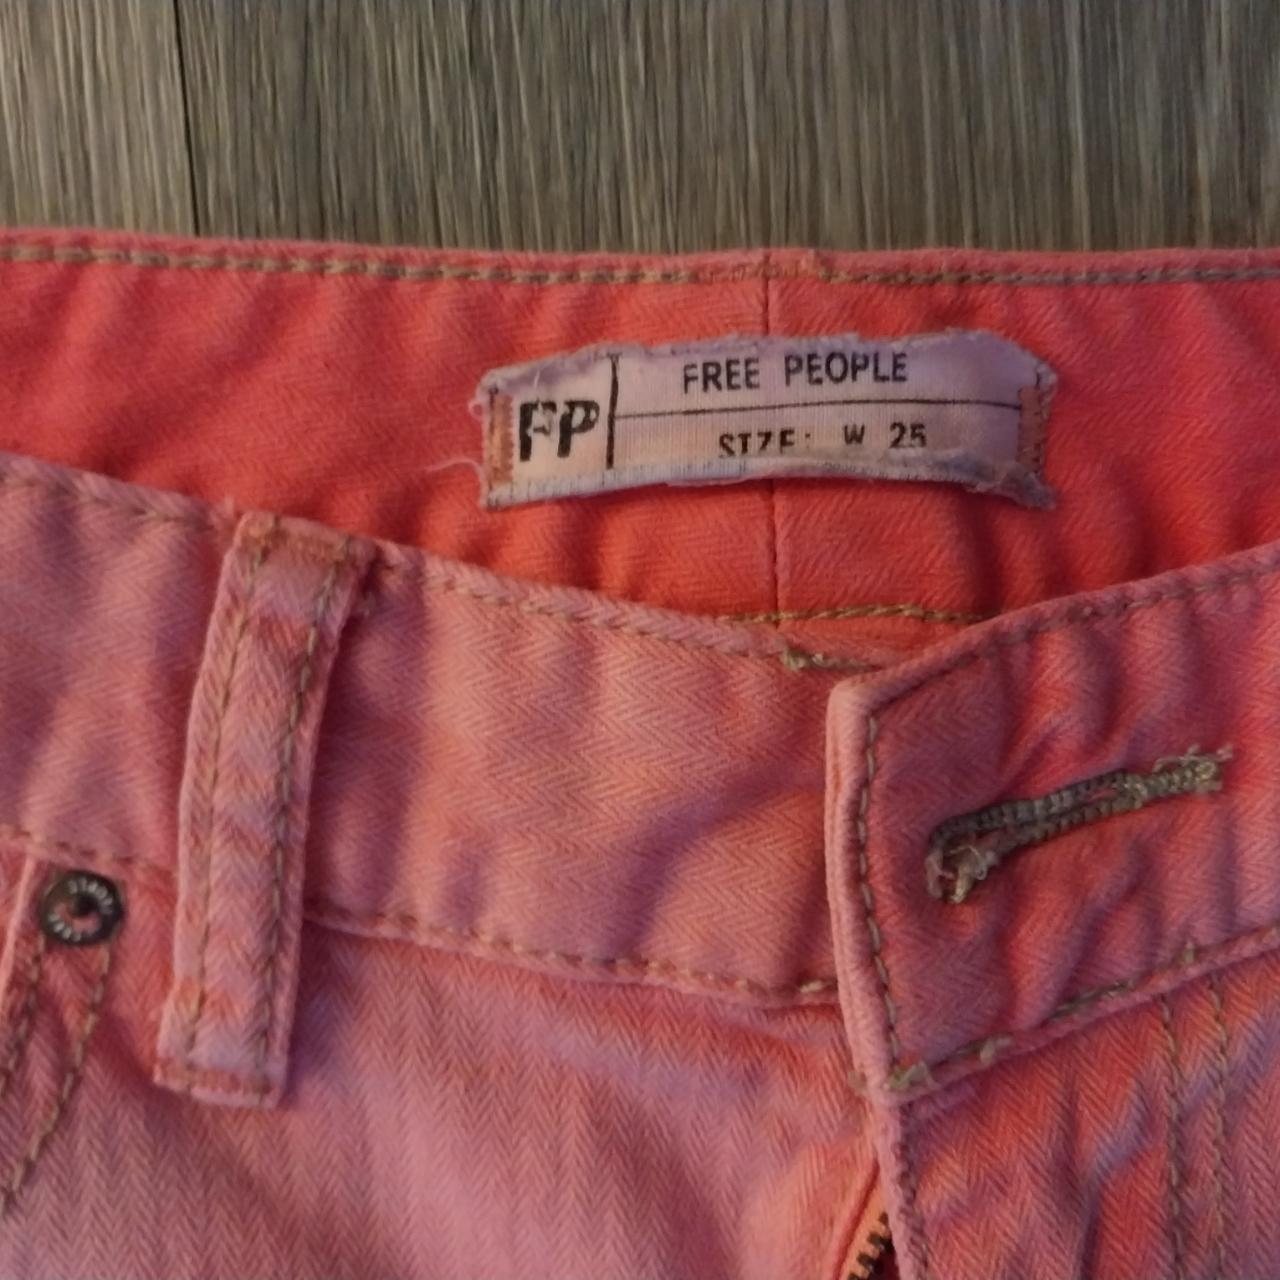 Free People Women's Jeans Orange/Coral Colored Size... - Depop